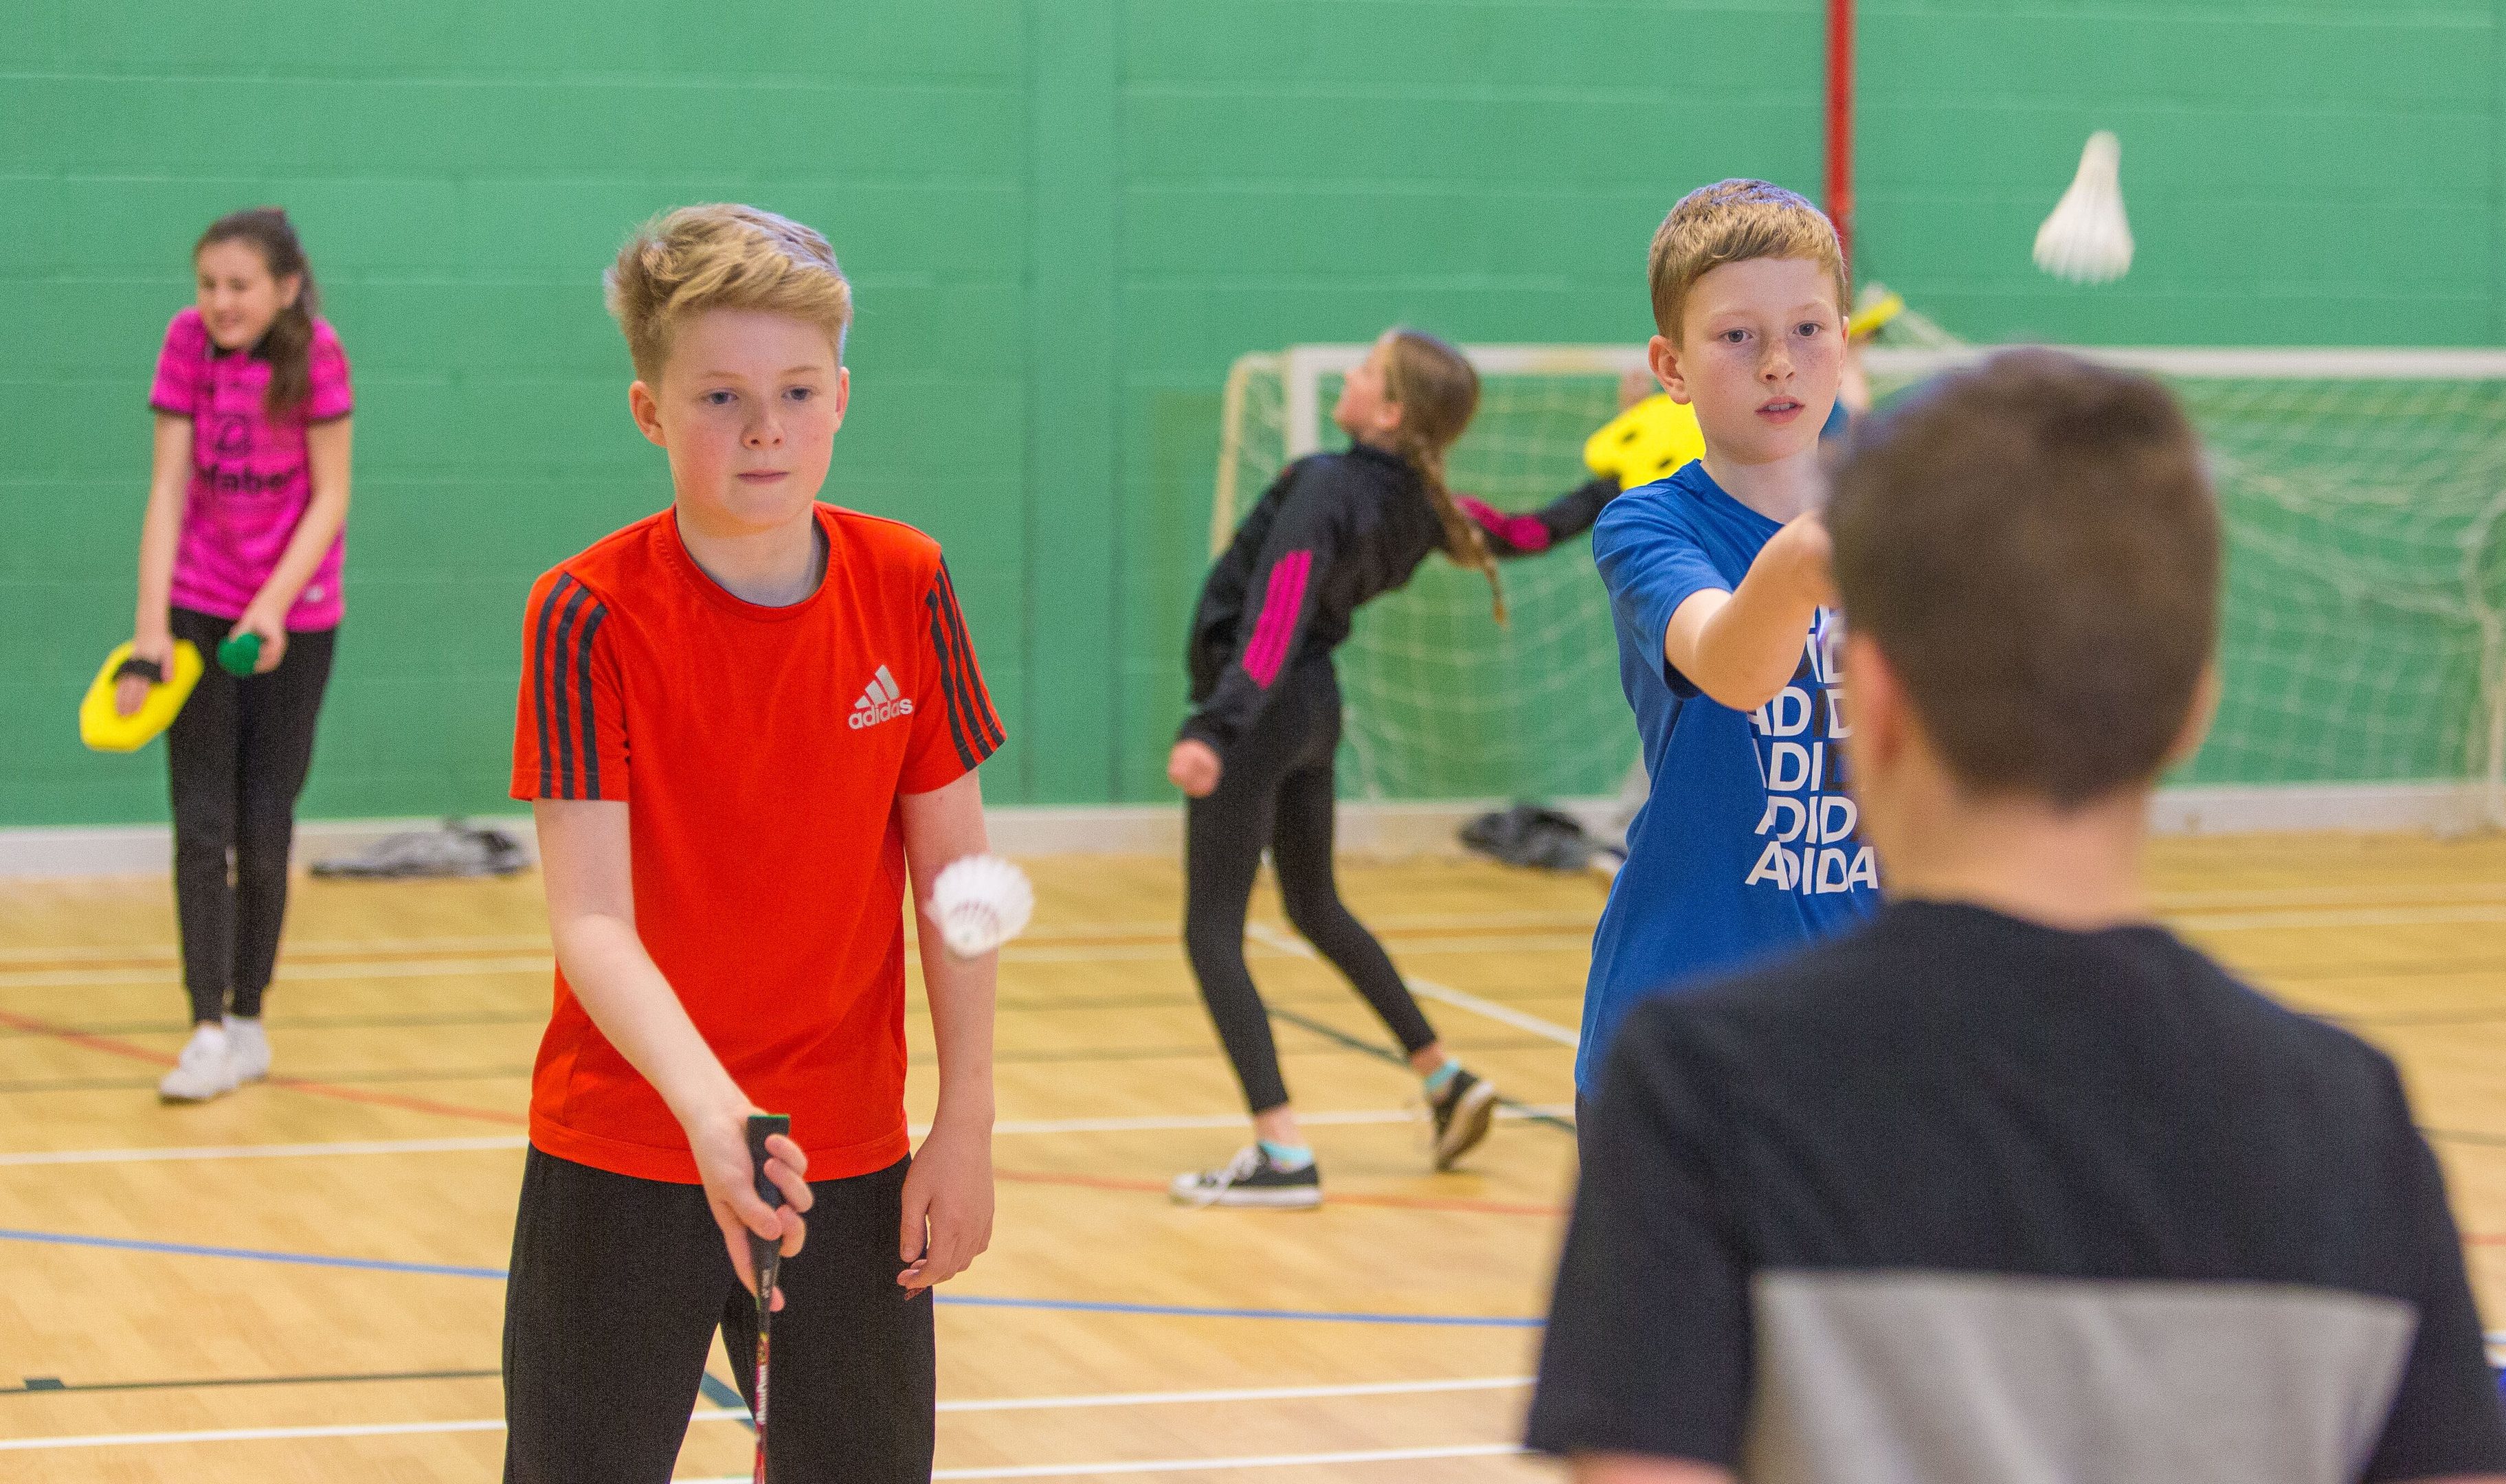 Moray council getting familes active with badminton